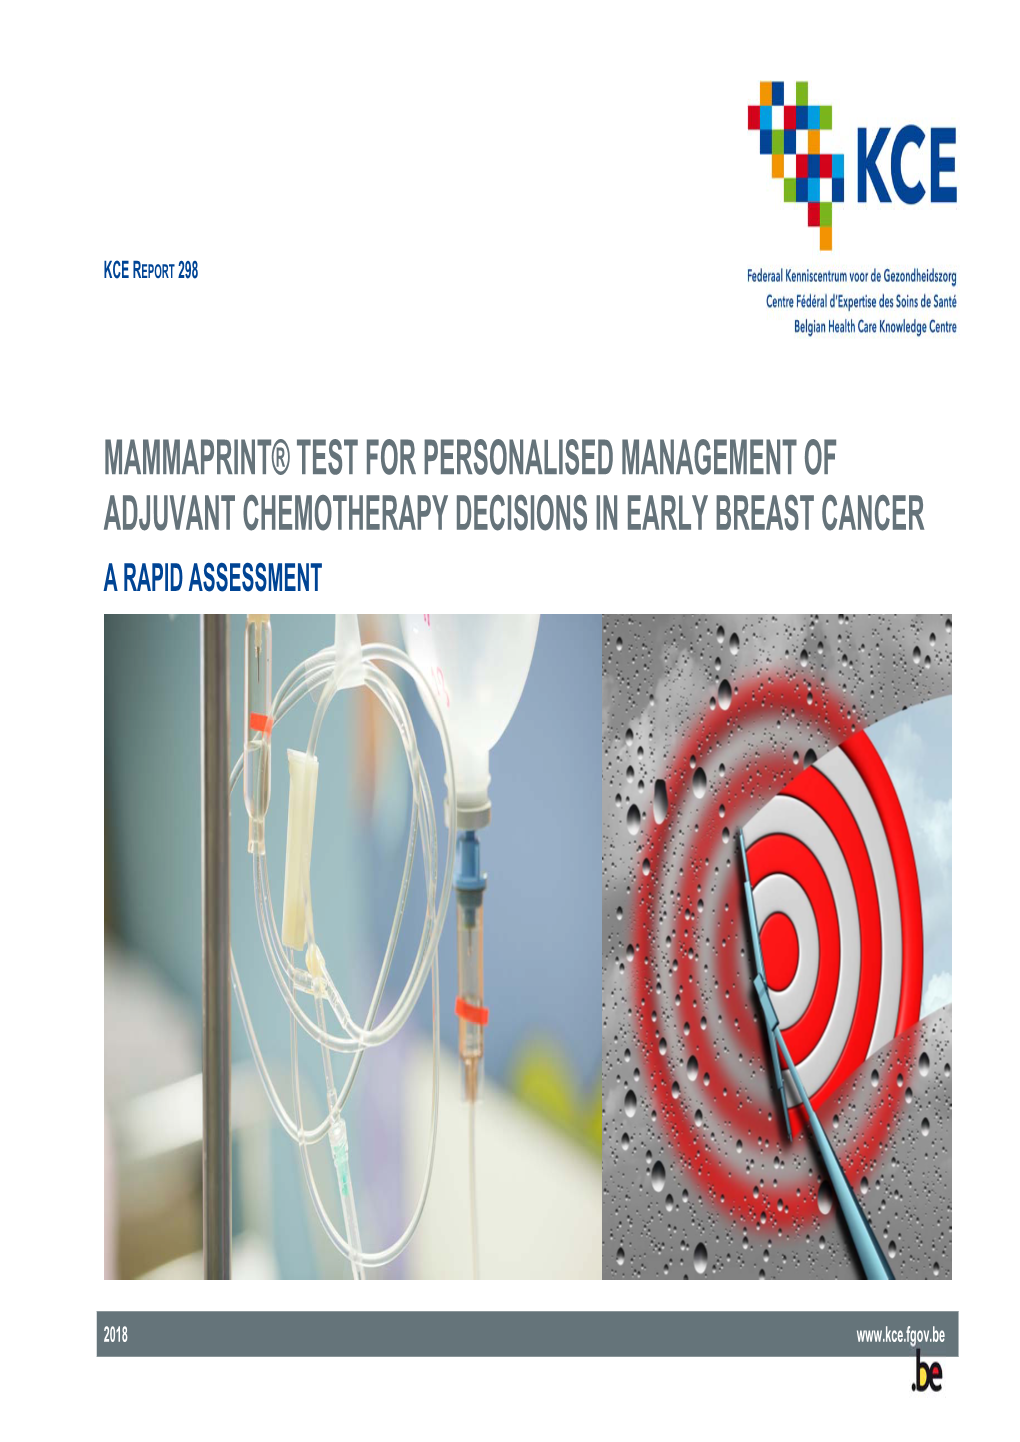 Mammaprint® Test for Personalised Management of Adjuvant Chemotherapy Decisions in Early Breast Cancer a Rapid Assessment